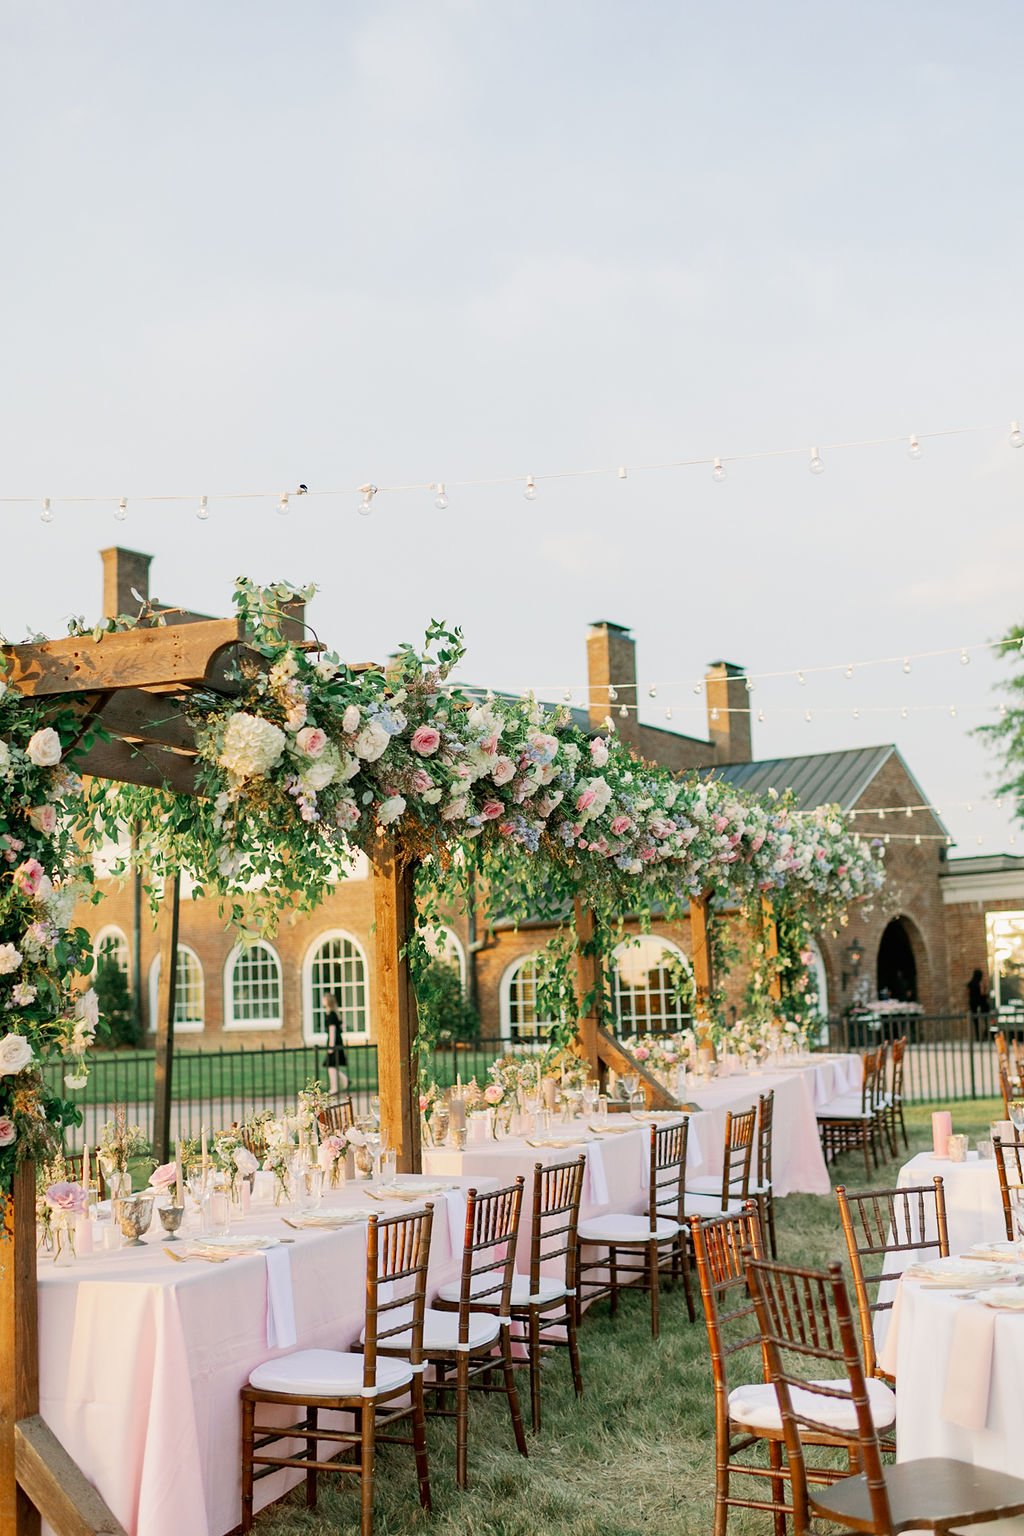 This private estate garden-inspired head table pergola is covered with pink and ivory roses, majolica spray roses, heirloom carnations, blue delphinium, hydrangea and natural greenery. Designed by Rosemary & Finch in Nashville, TN.